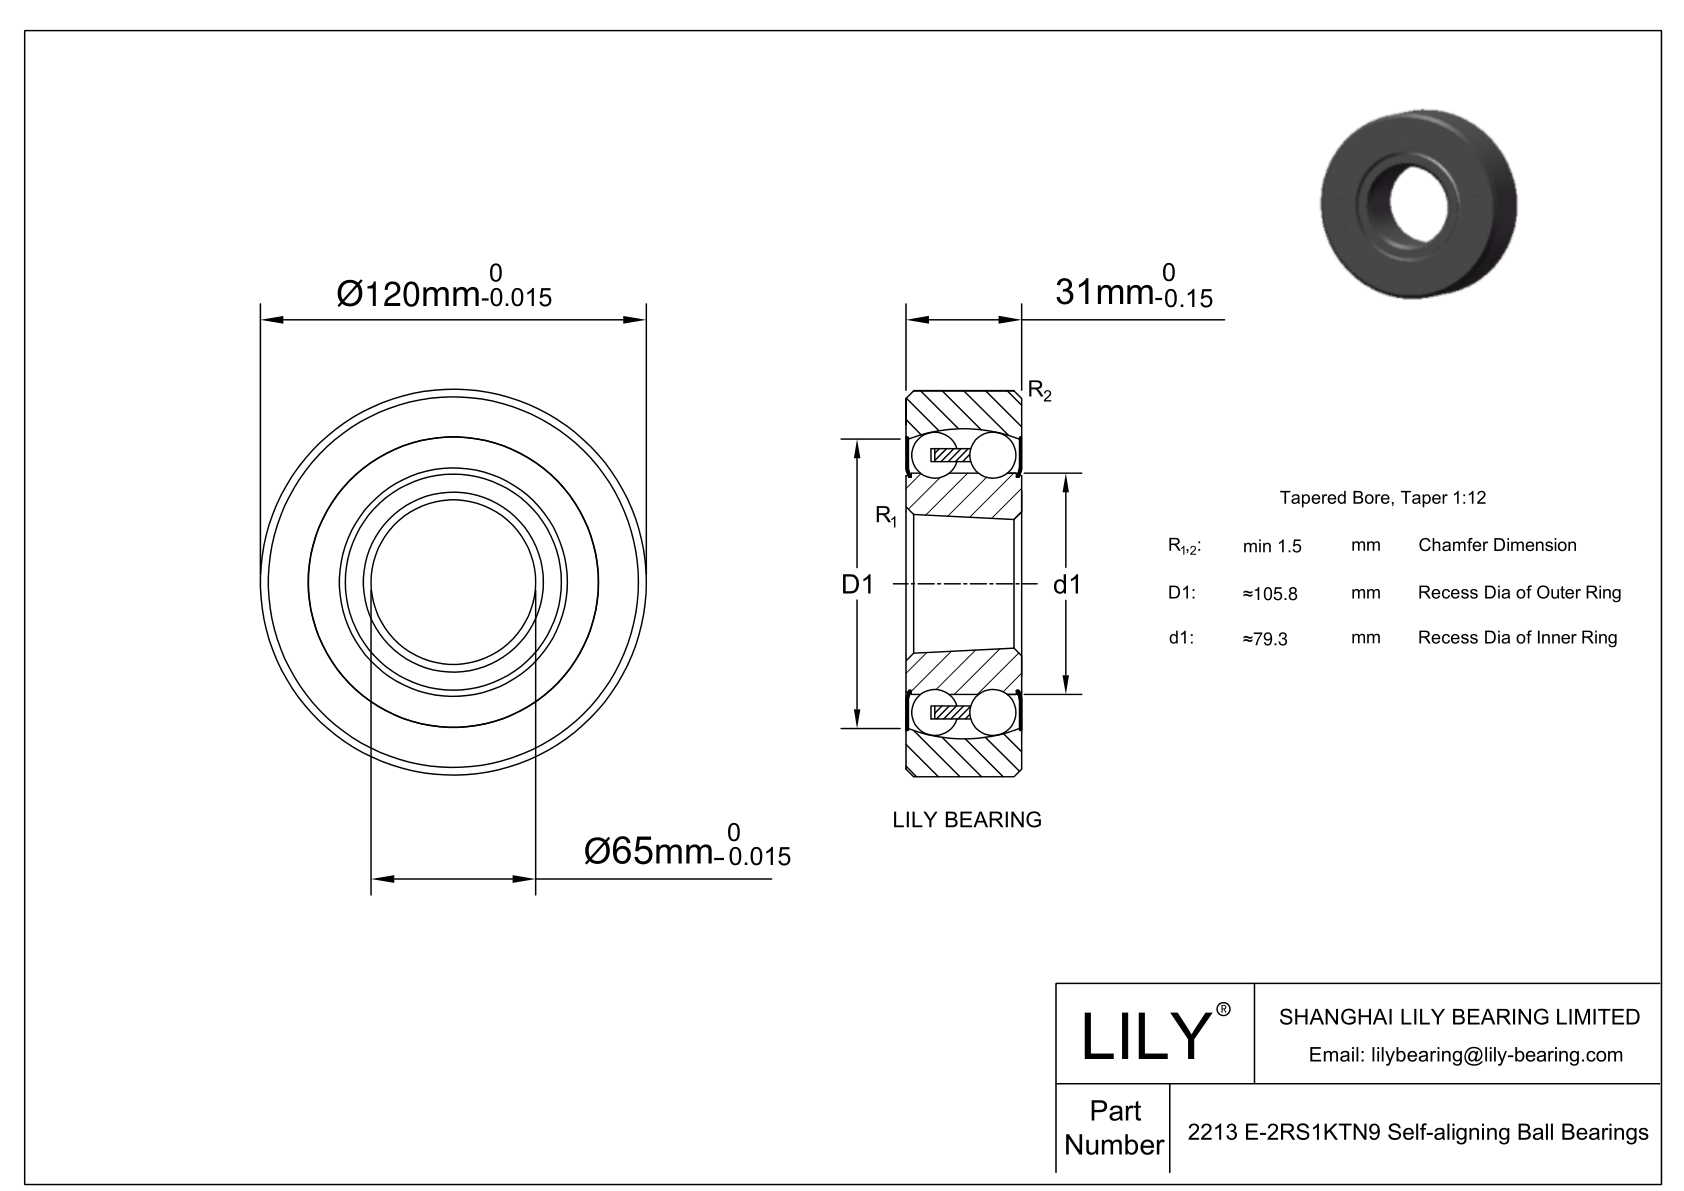 CE2213 E-SCPP Silicon Carbide Self Aligning Ball Bearings cad drawing